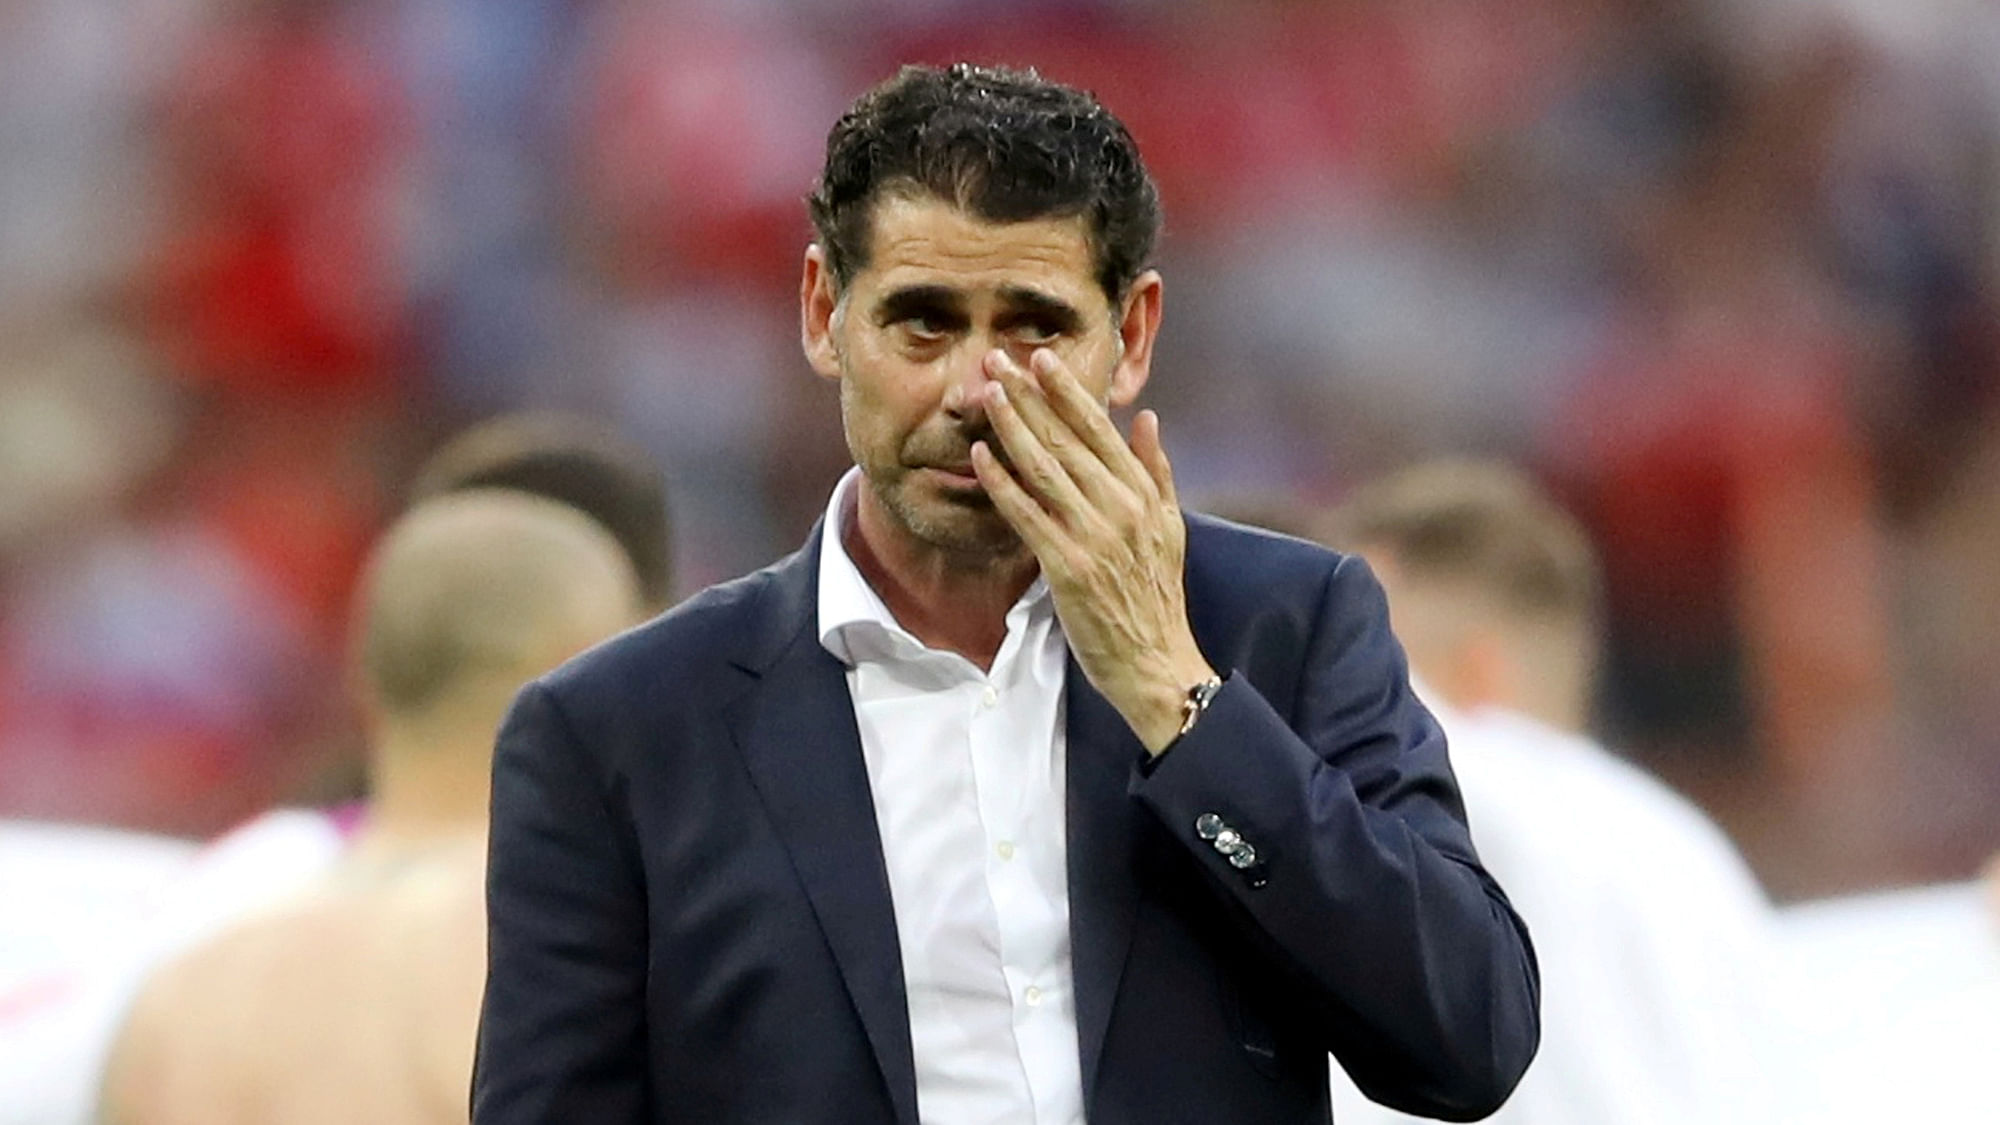 Spain coach Fernando Hierro looks dejected after losing the penalty shootout against Russia in the Round of 16 tie.&nbsp;